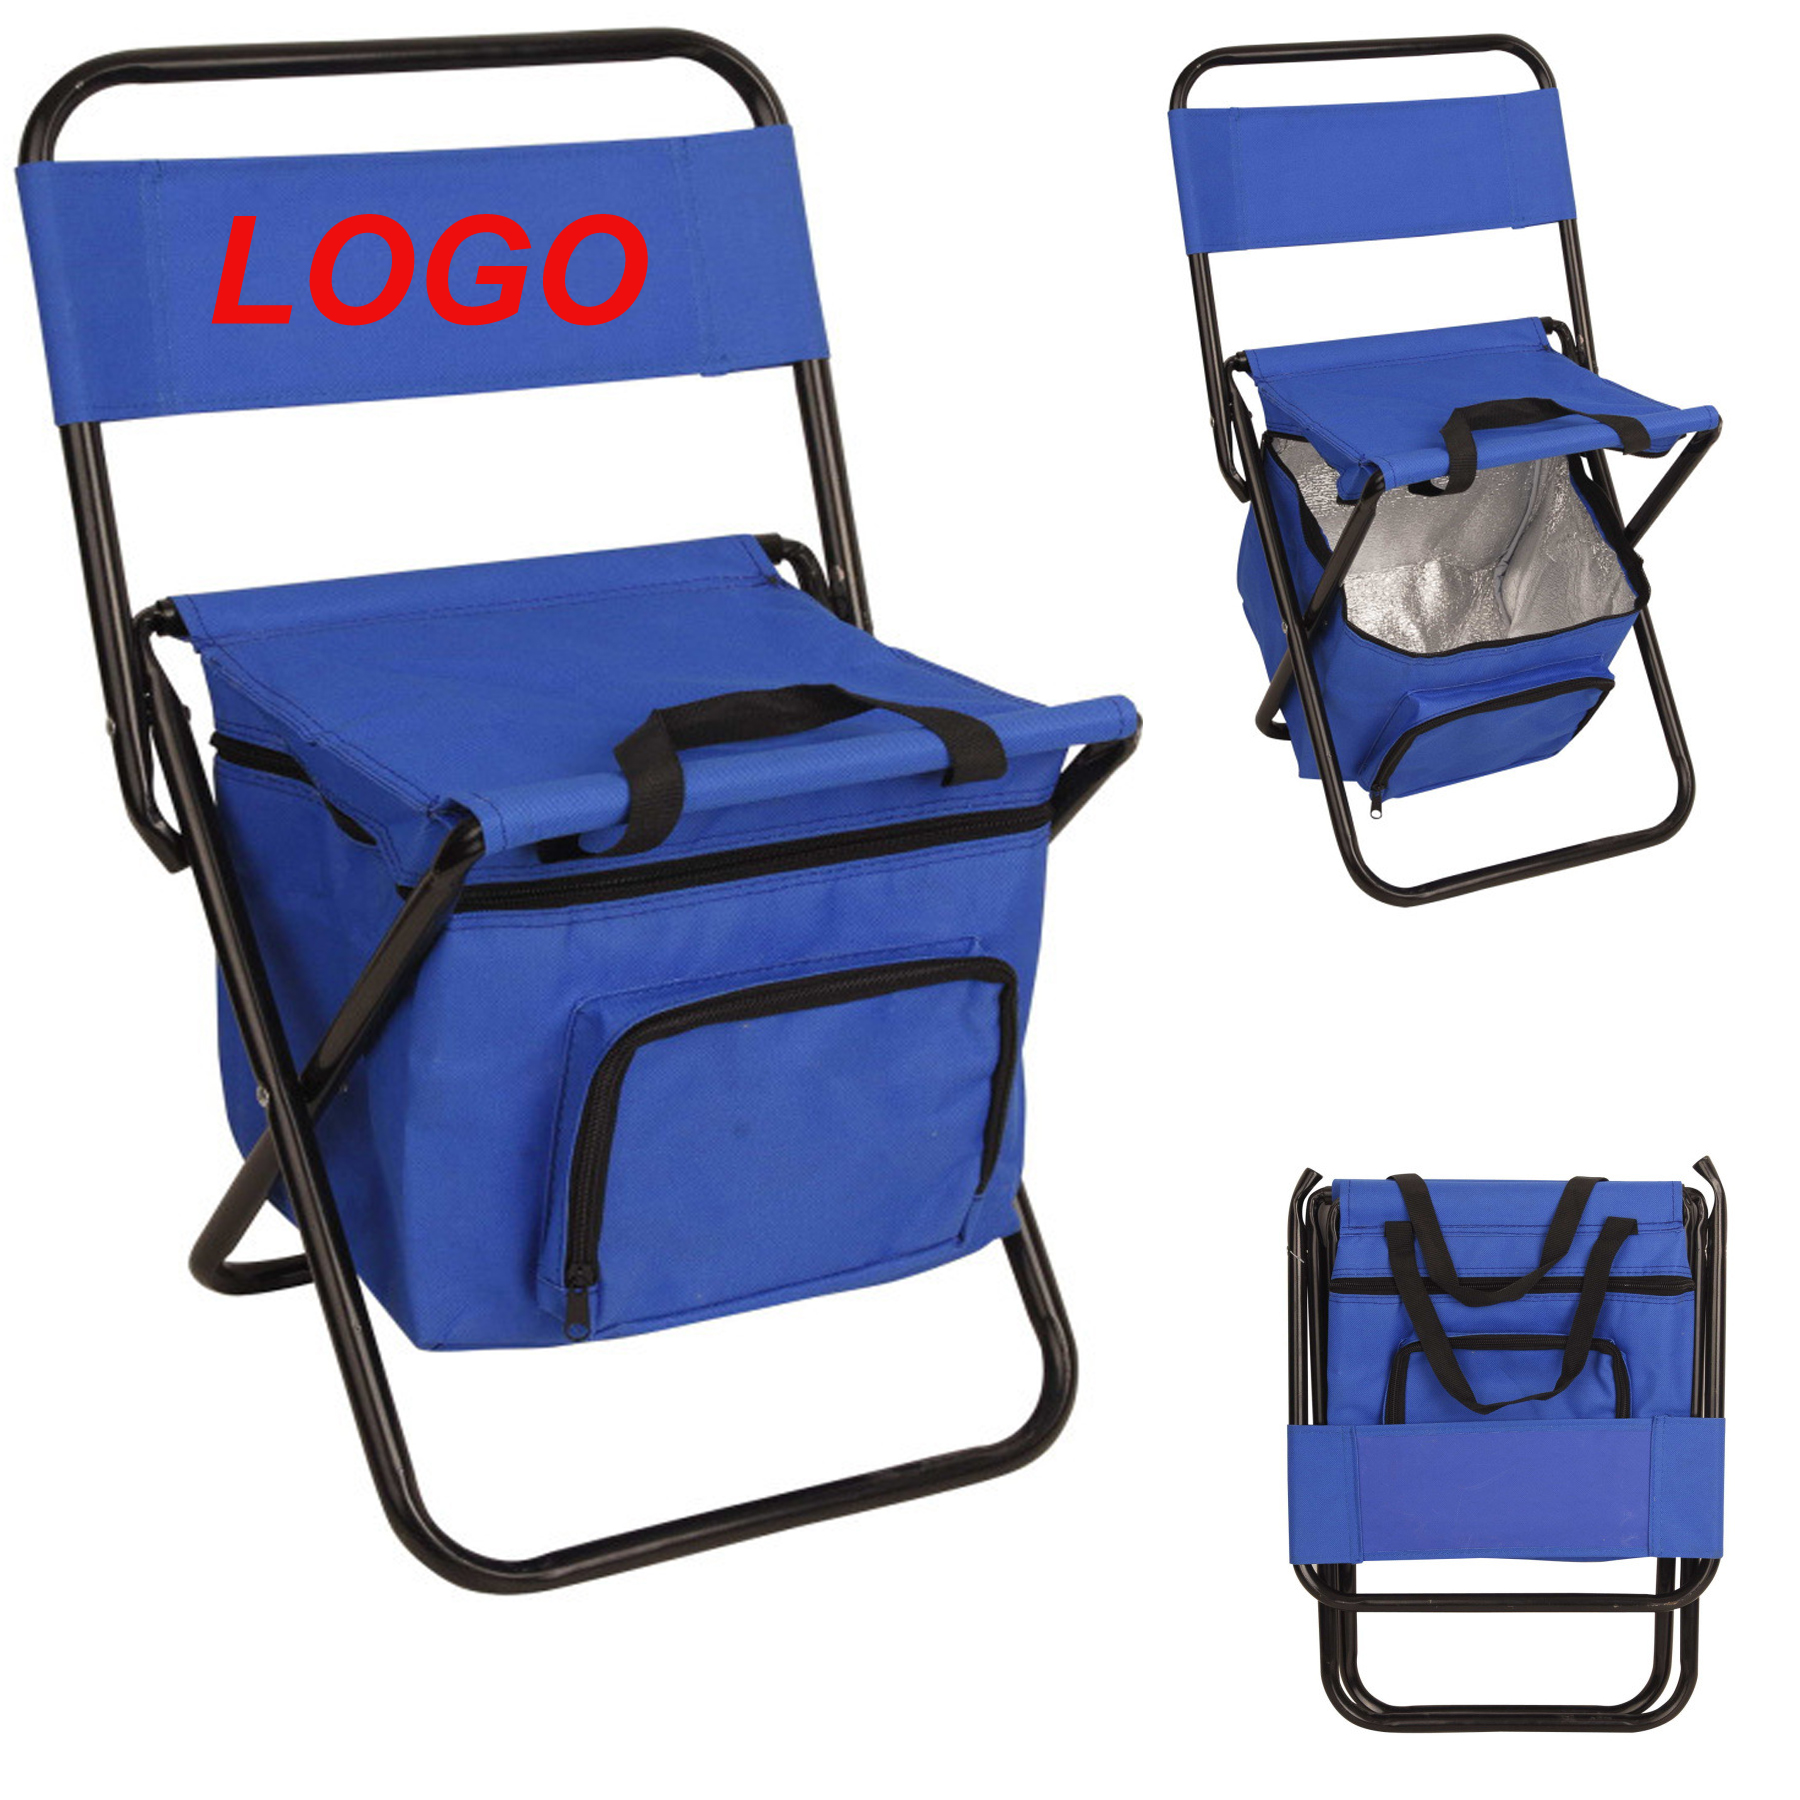 Collapsible Bench Chair with Pocket